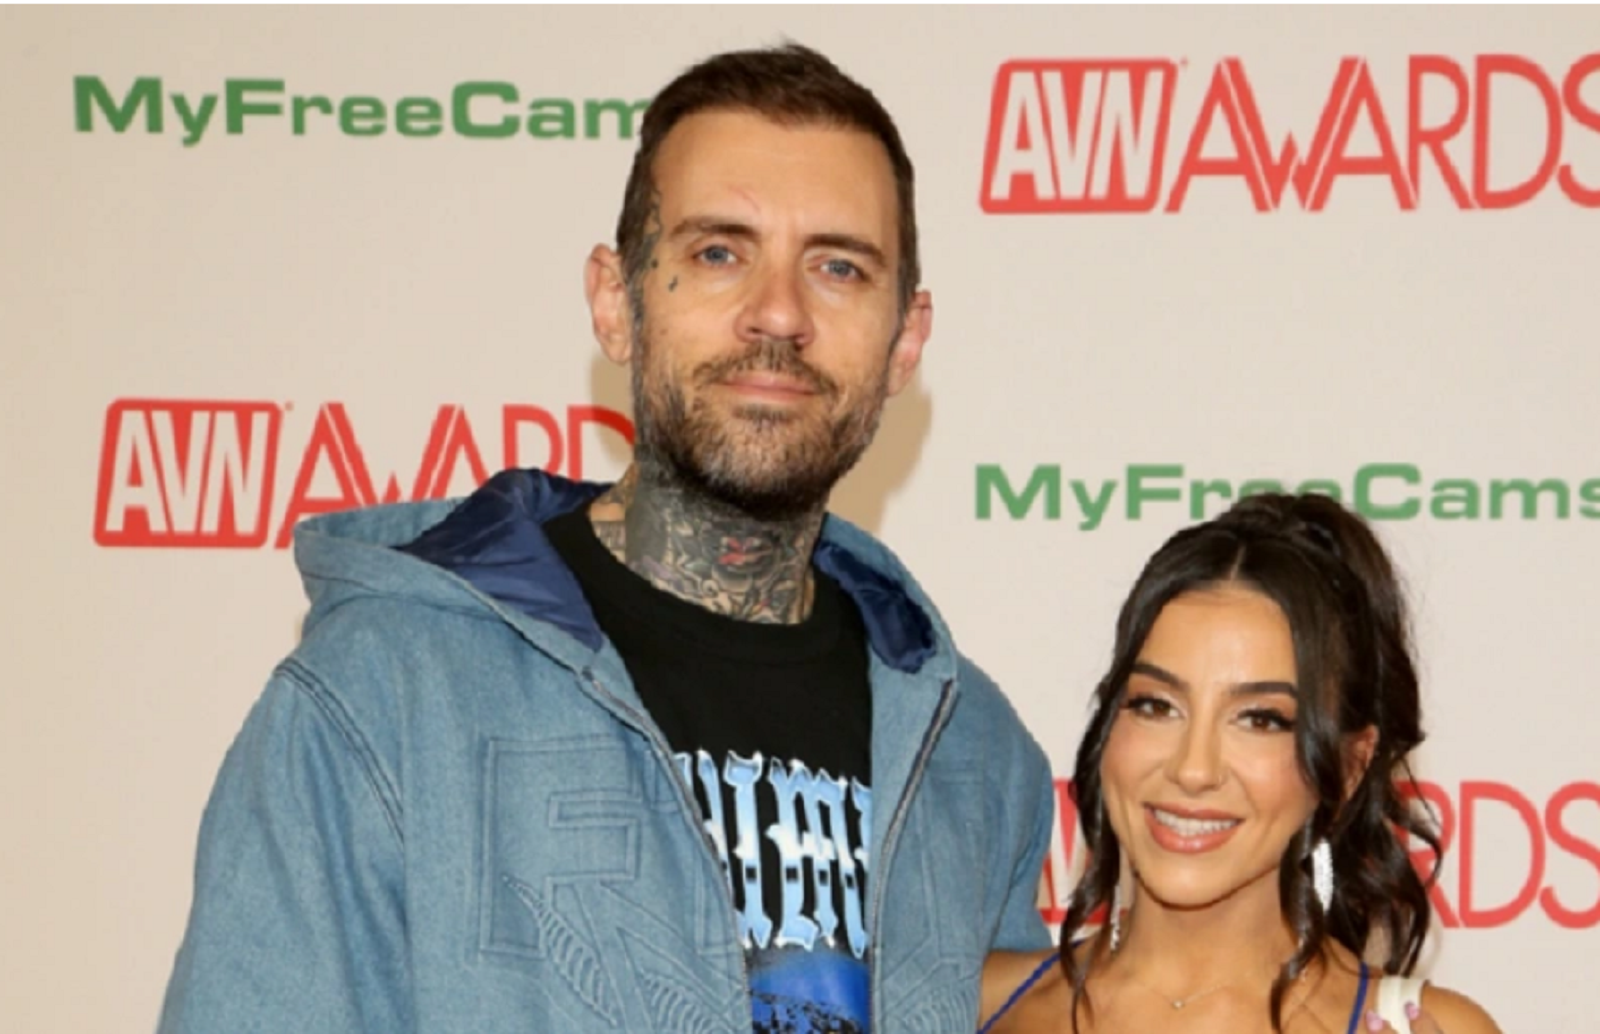 Adam22 and Lena on the red carpet